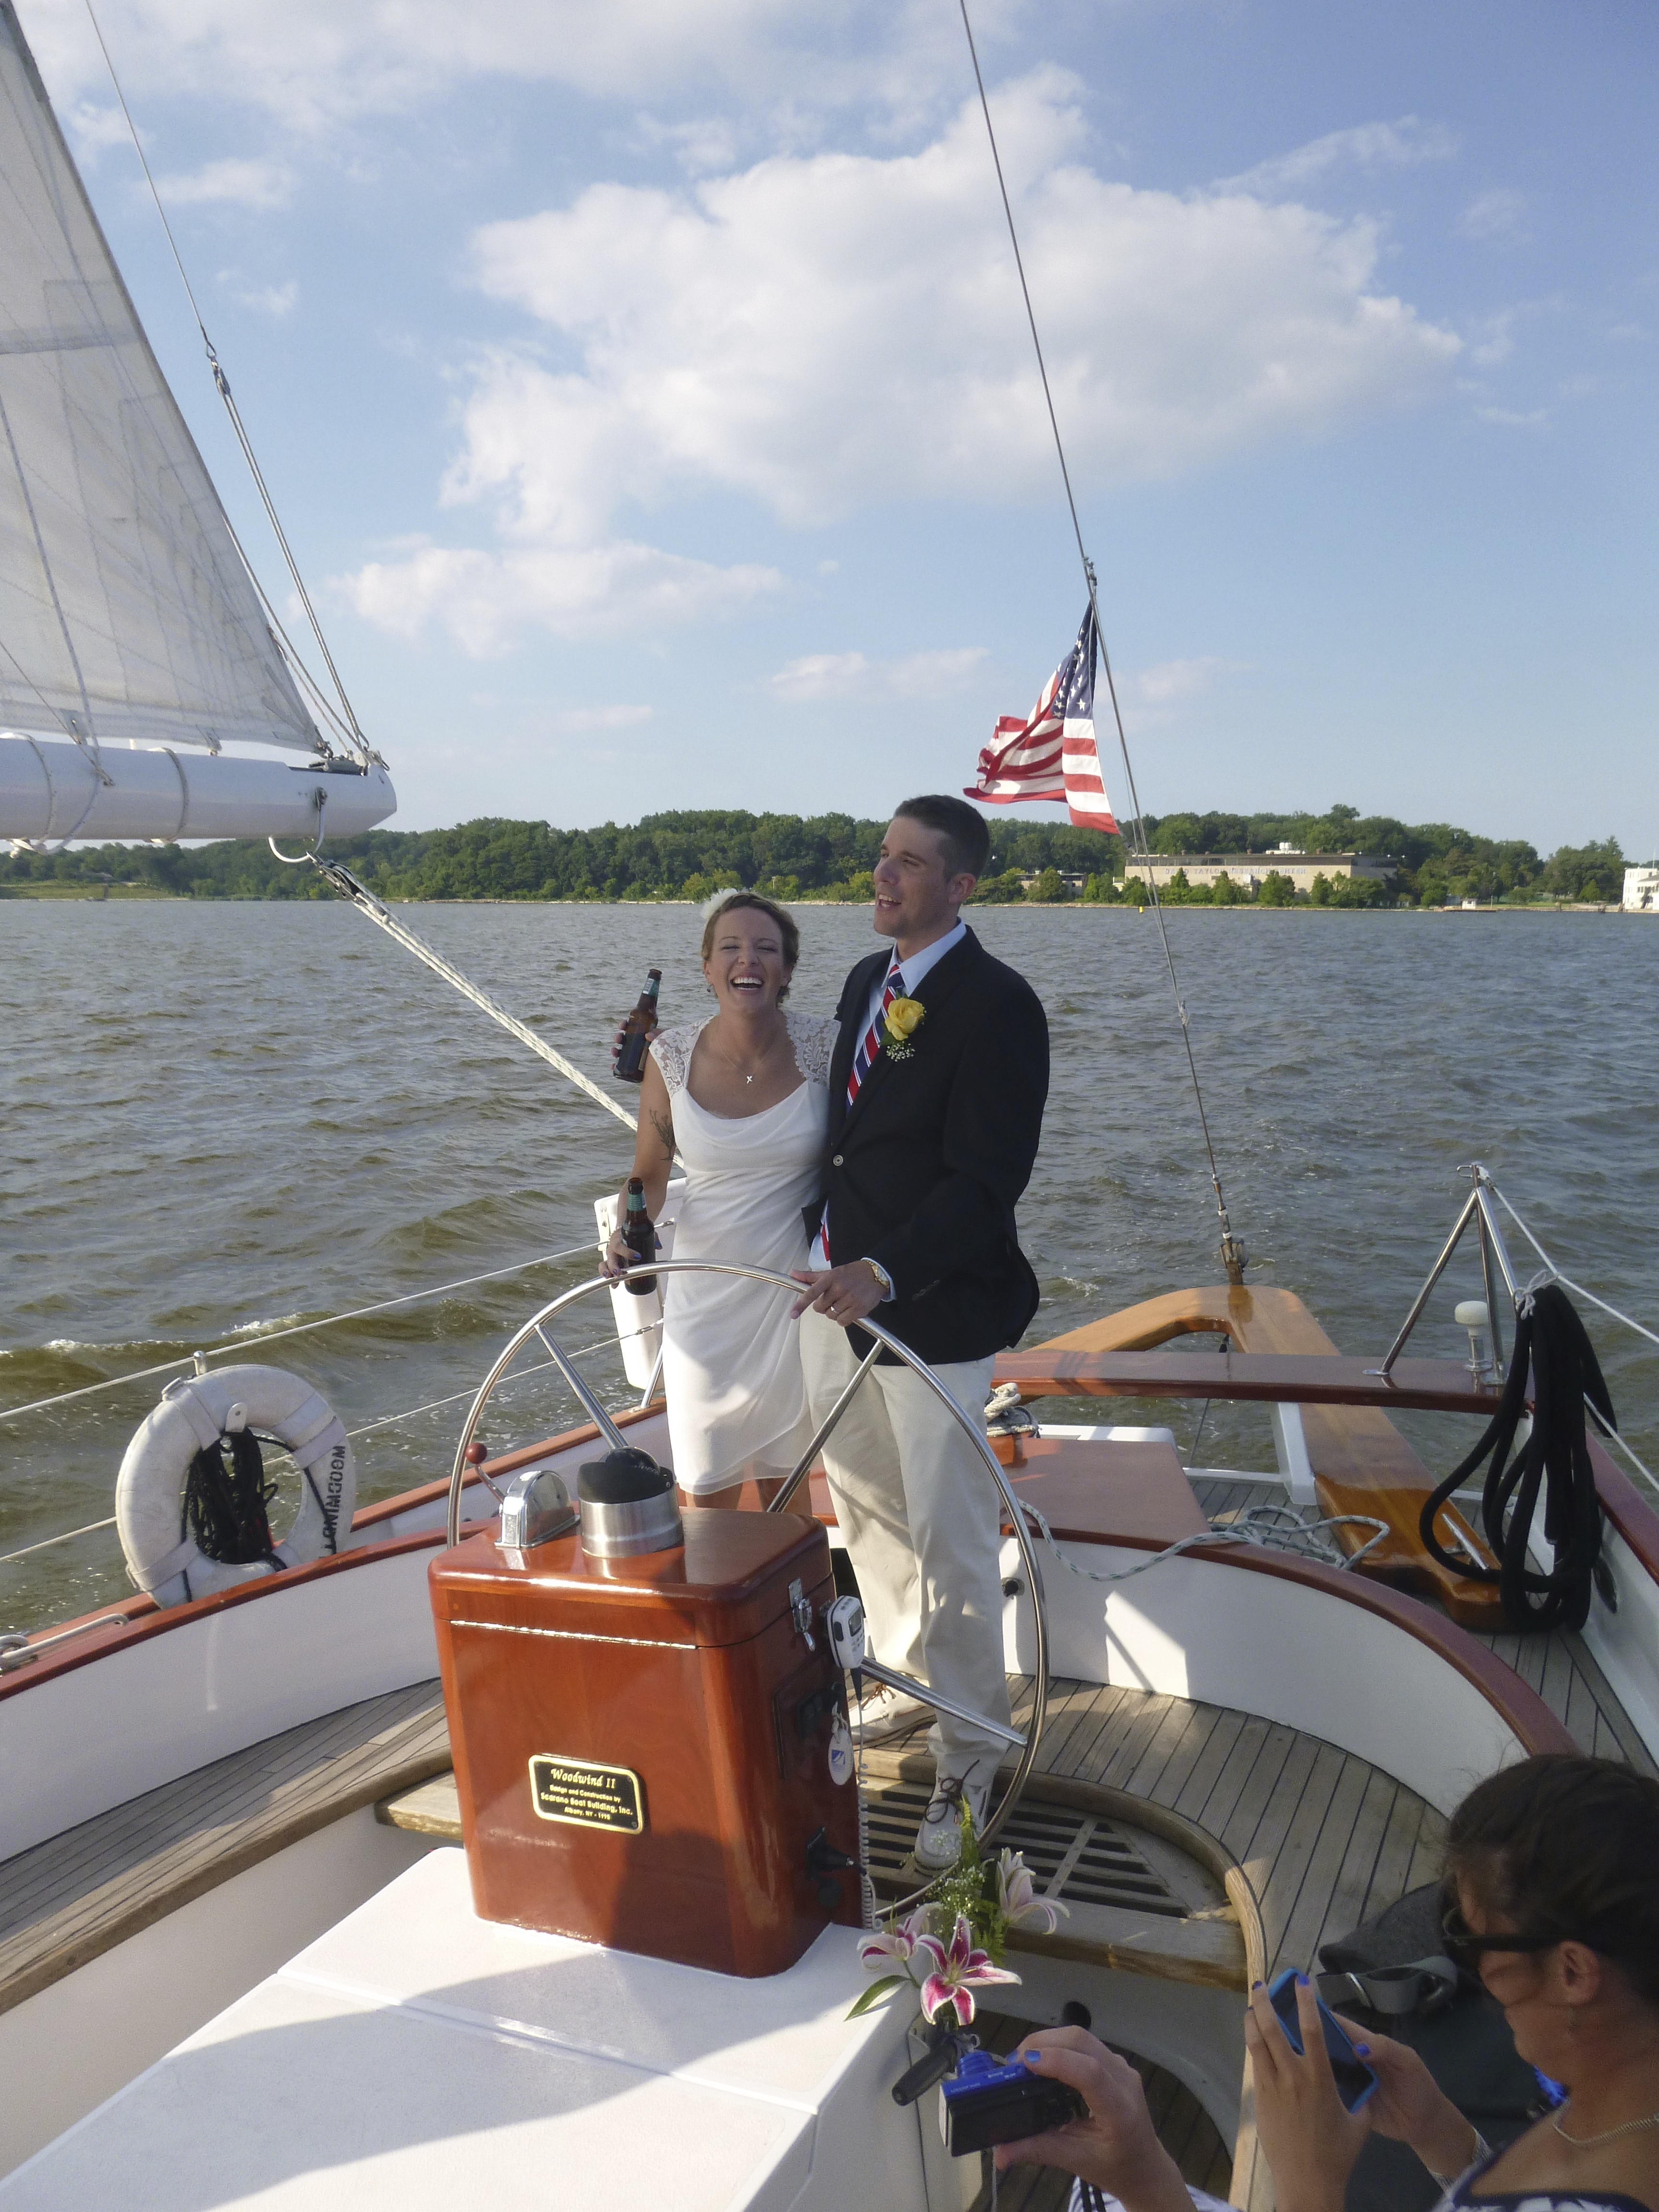 Introducing Alex and Sara Patterson just married on the schooner